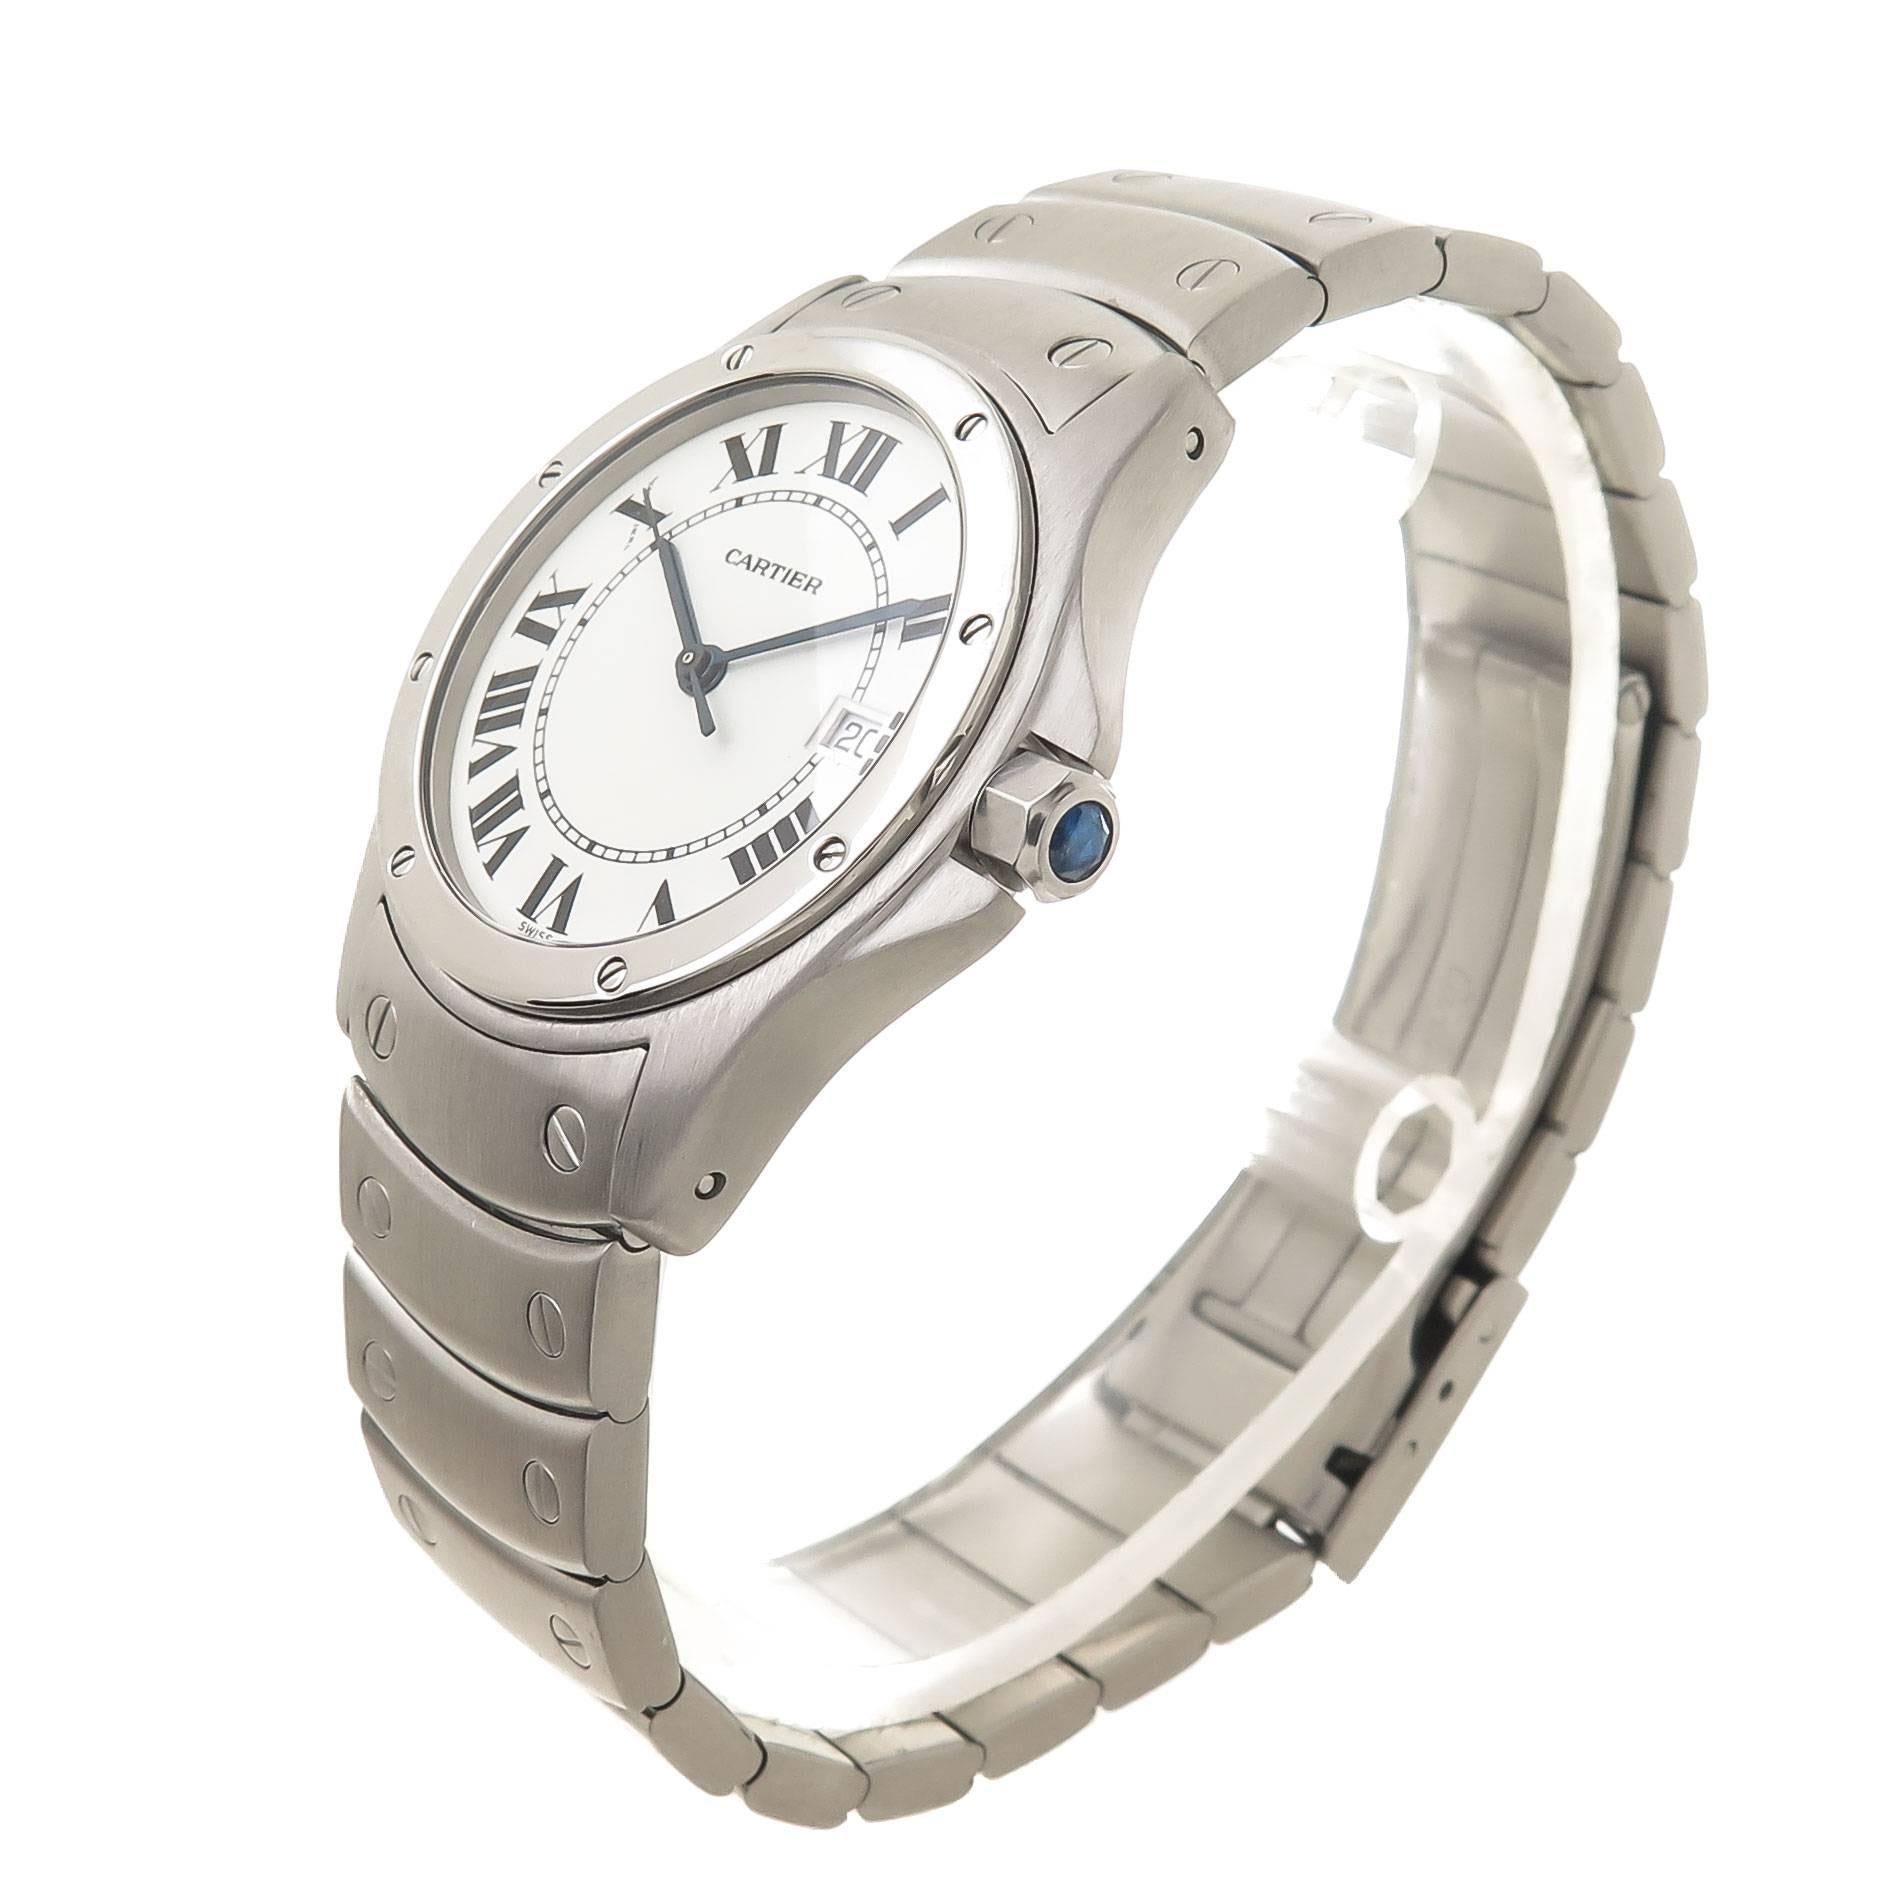 Circa 2005 Cartier Santos Ronde Wrist watch, 29.5 MM Stainless steel Water resistant Case,  quartz Movement, White Dial with Black Roman Numerals, sweep seconds hand, calendar window at the 3 position, scratch resistant crystal and a sapphire